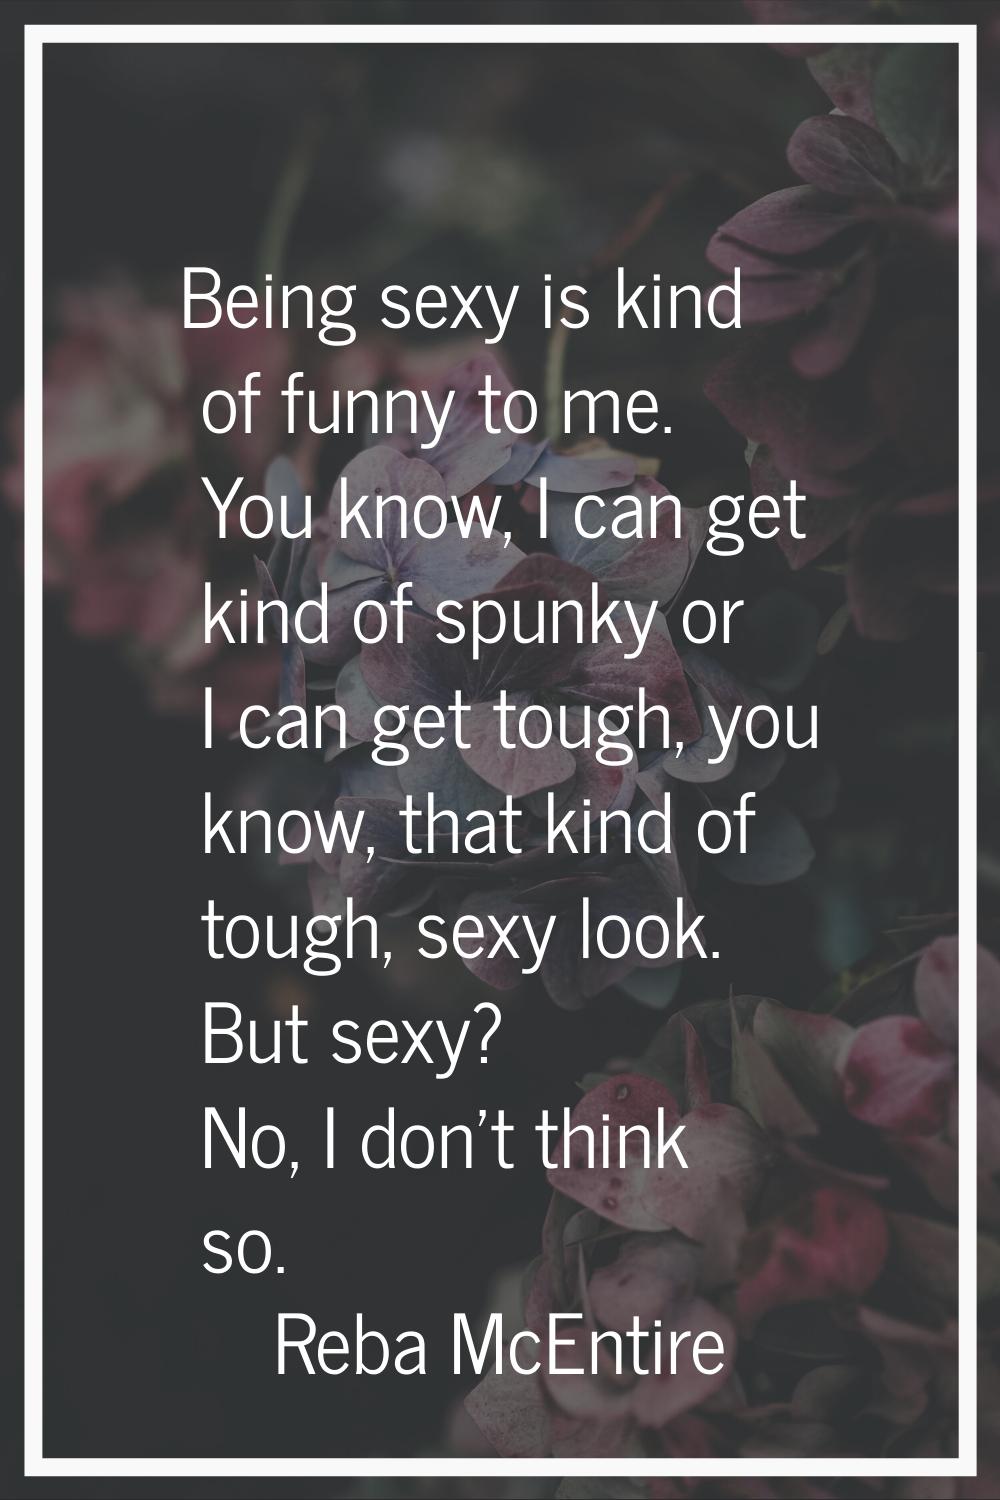 Being sexy is kind of funny to me. You know, I can get kind of spunky or I can get tough, you know,